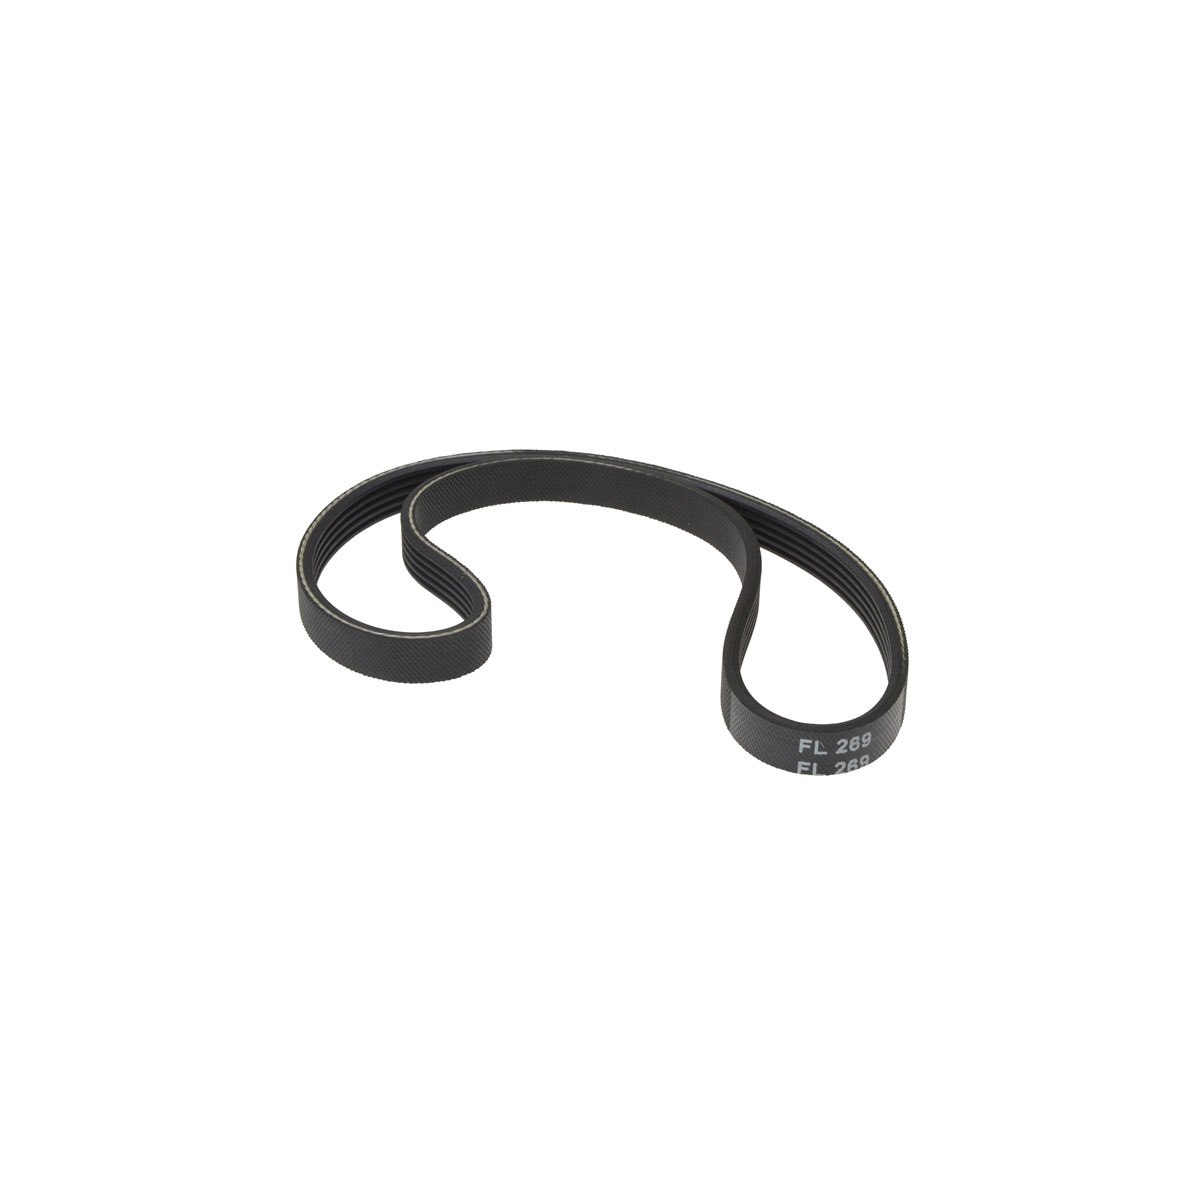 ALM FL269 - Drive Belt To Fit Flymo Lawnmowers